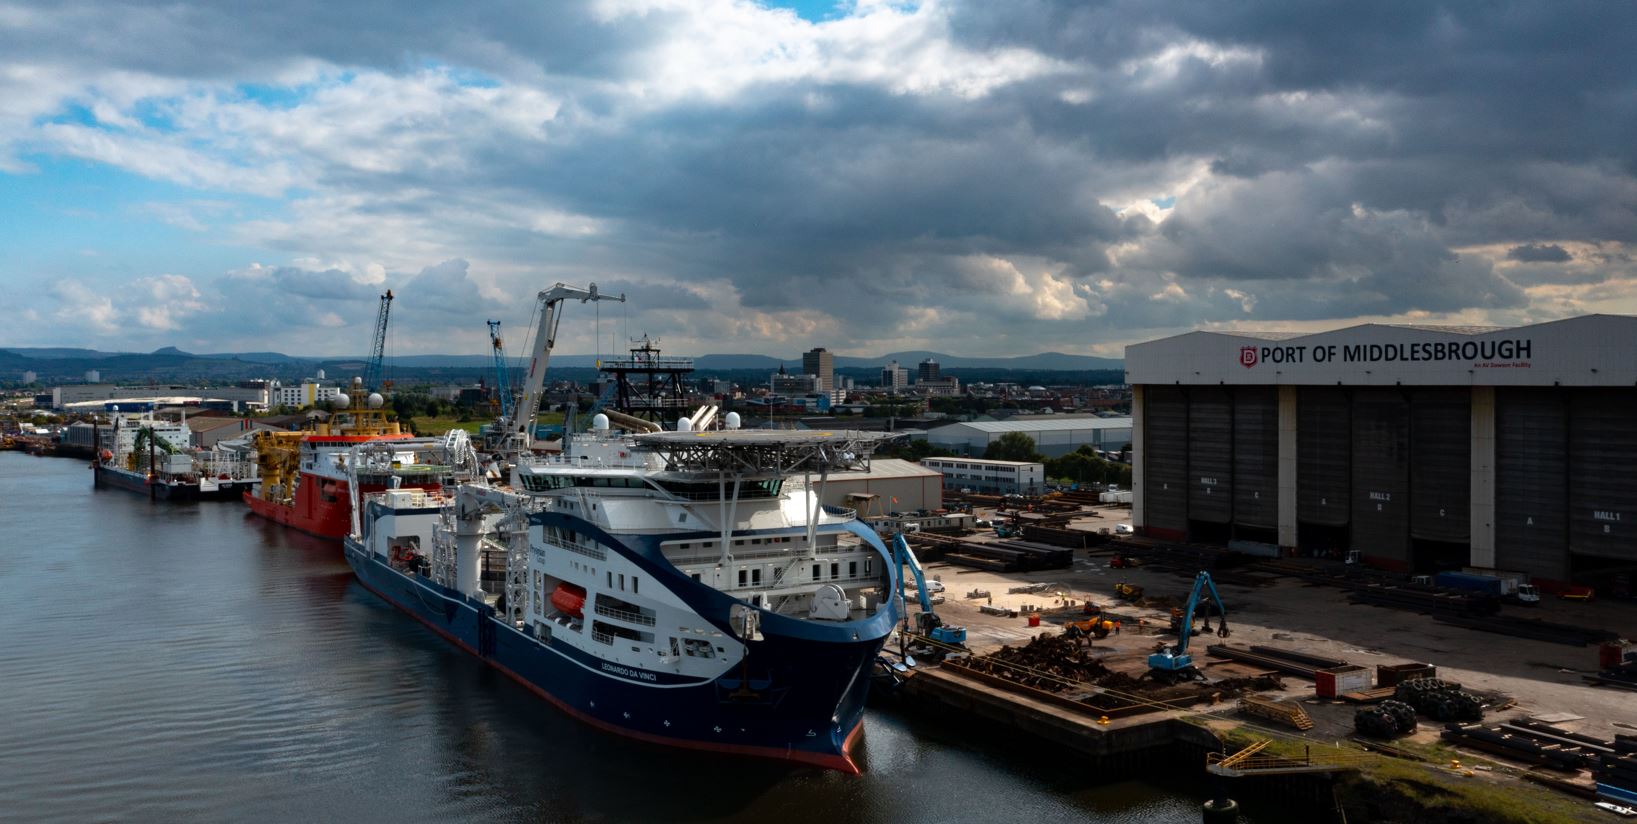 New jobs expected in North East England as Prysmian inks deal with Middlesbrough Port